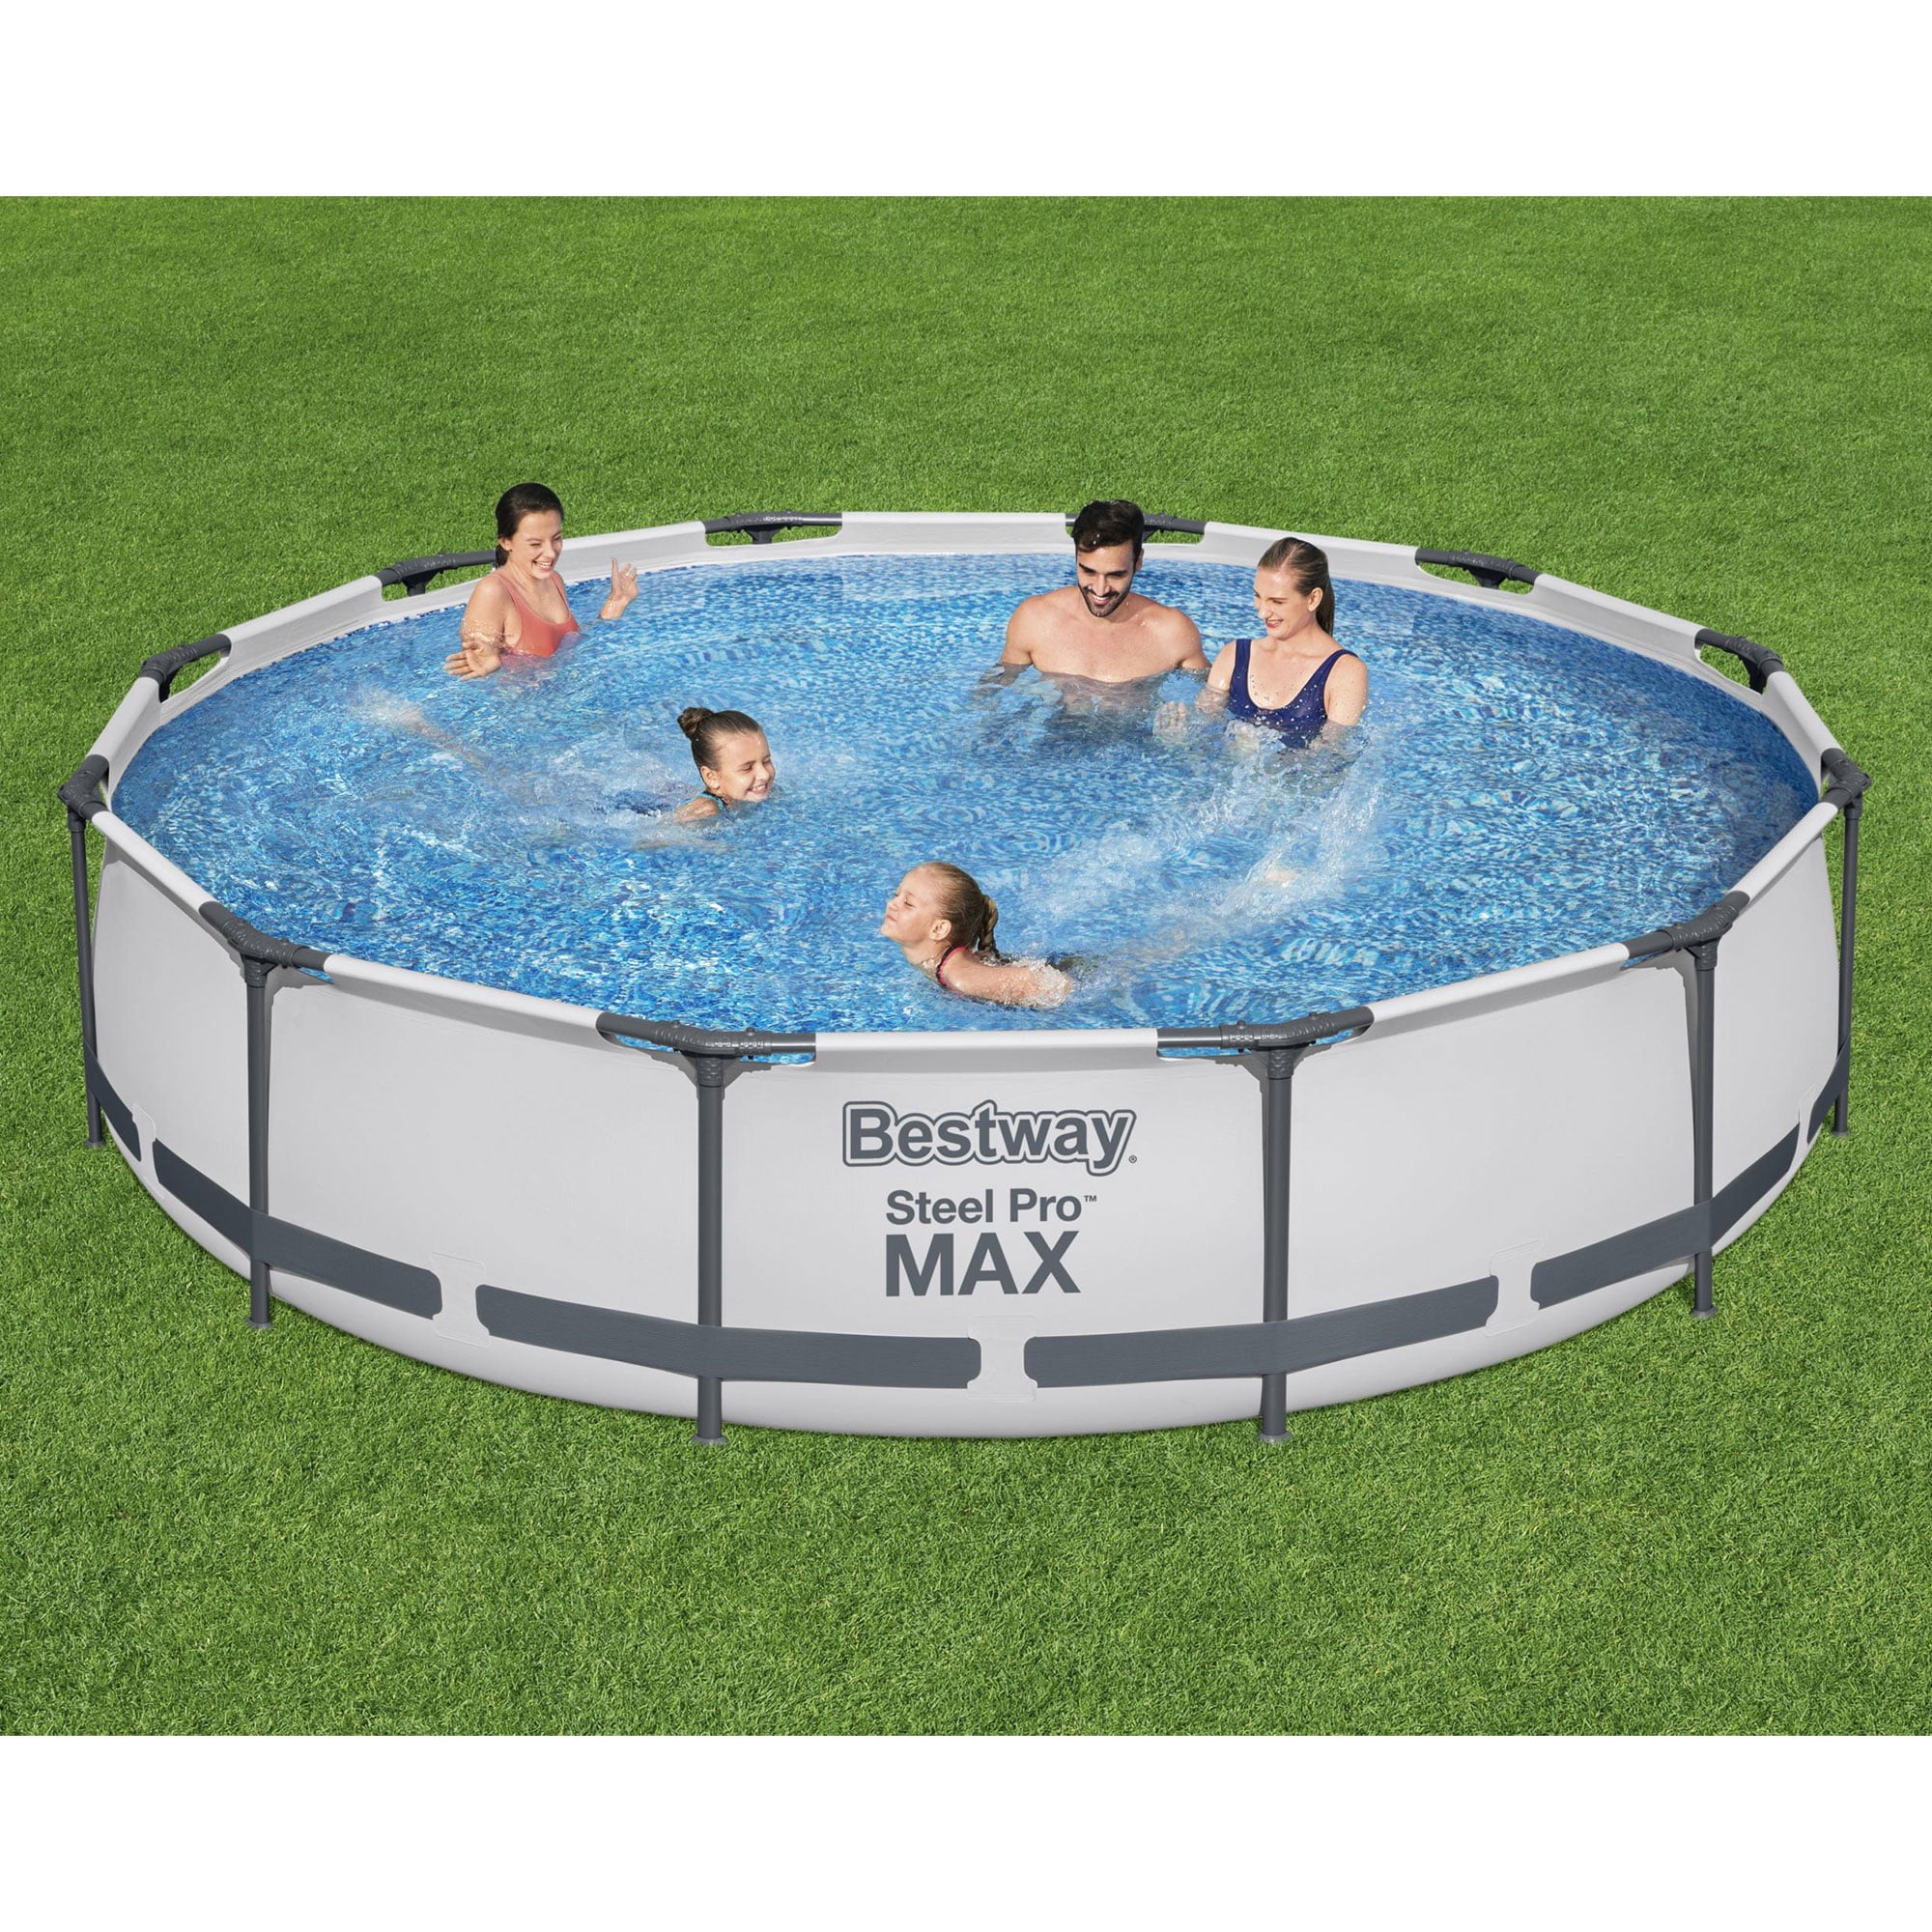 Bestway Steel Pro MAX 12 Foot by 30 Inch Above Ground Swimming Pool Set